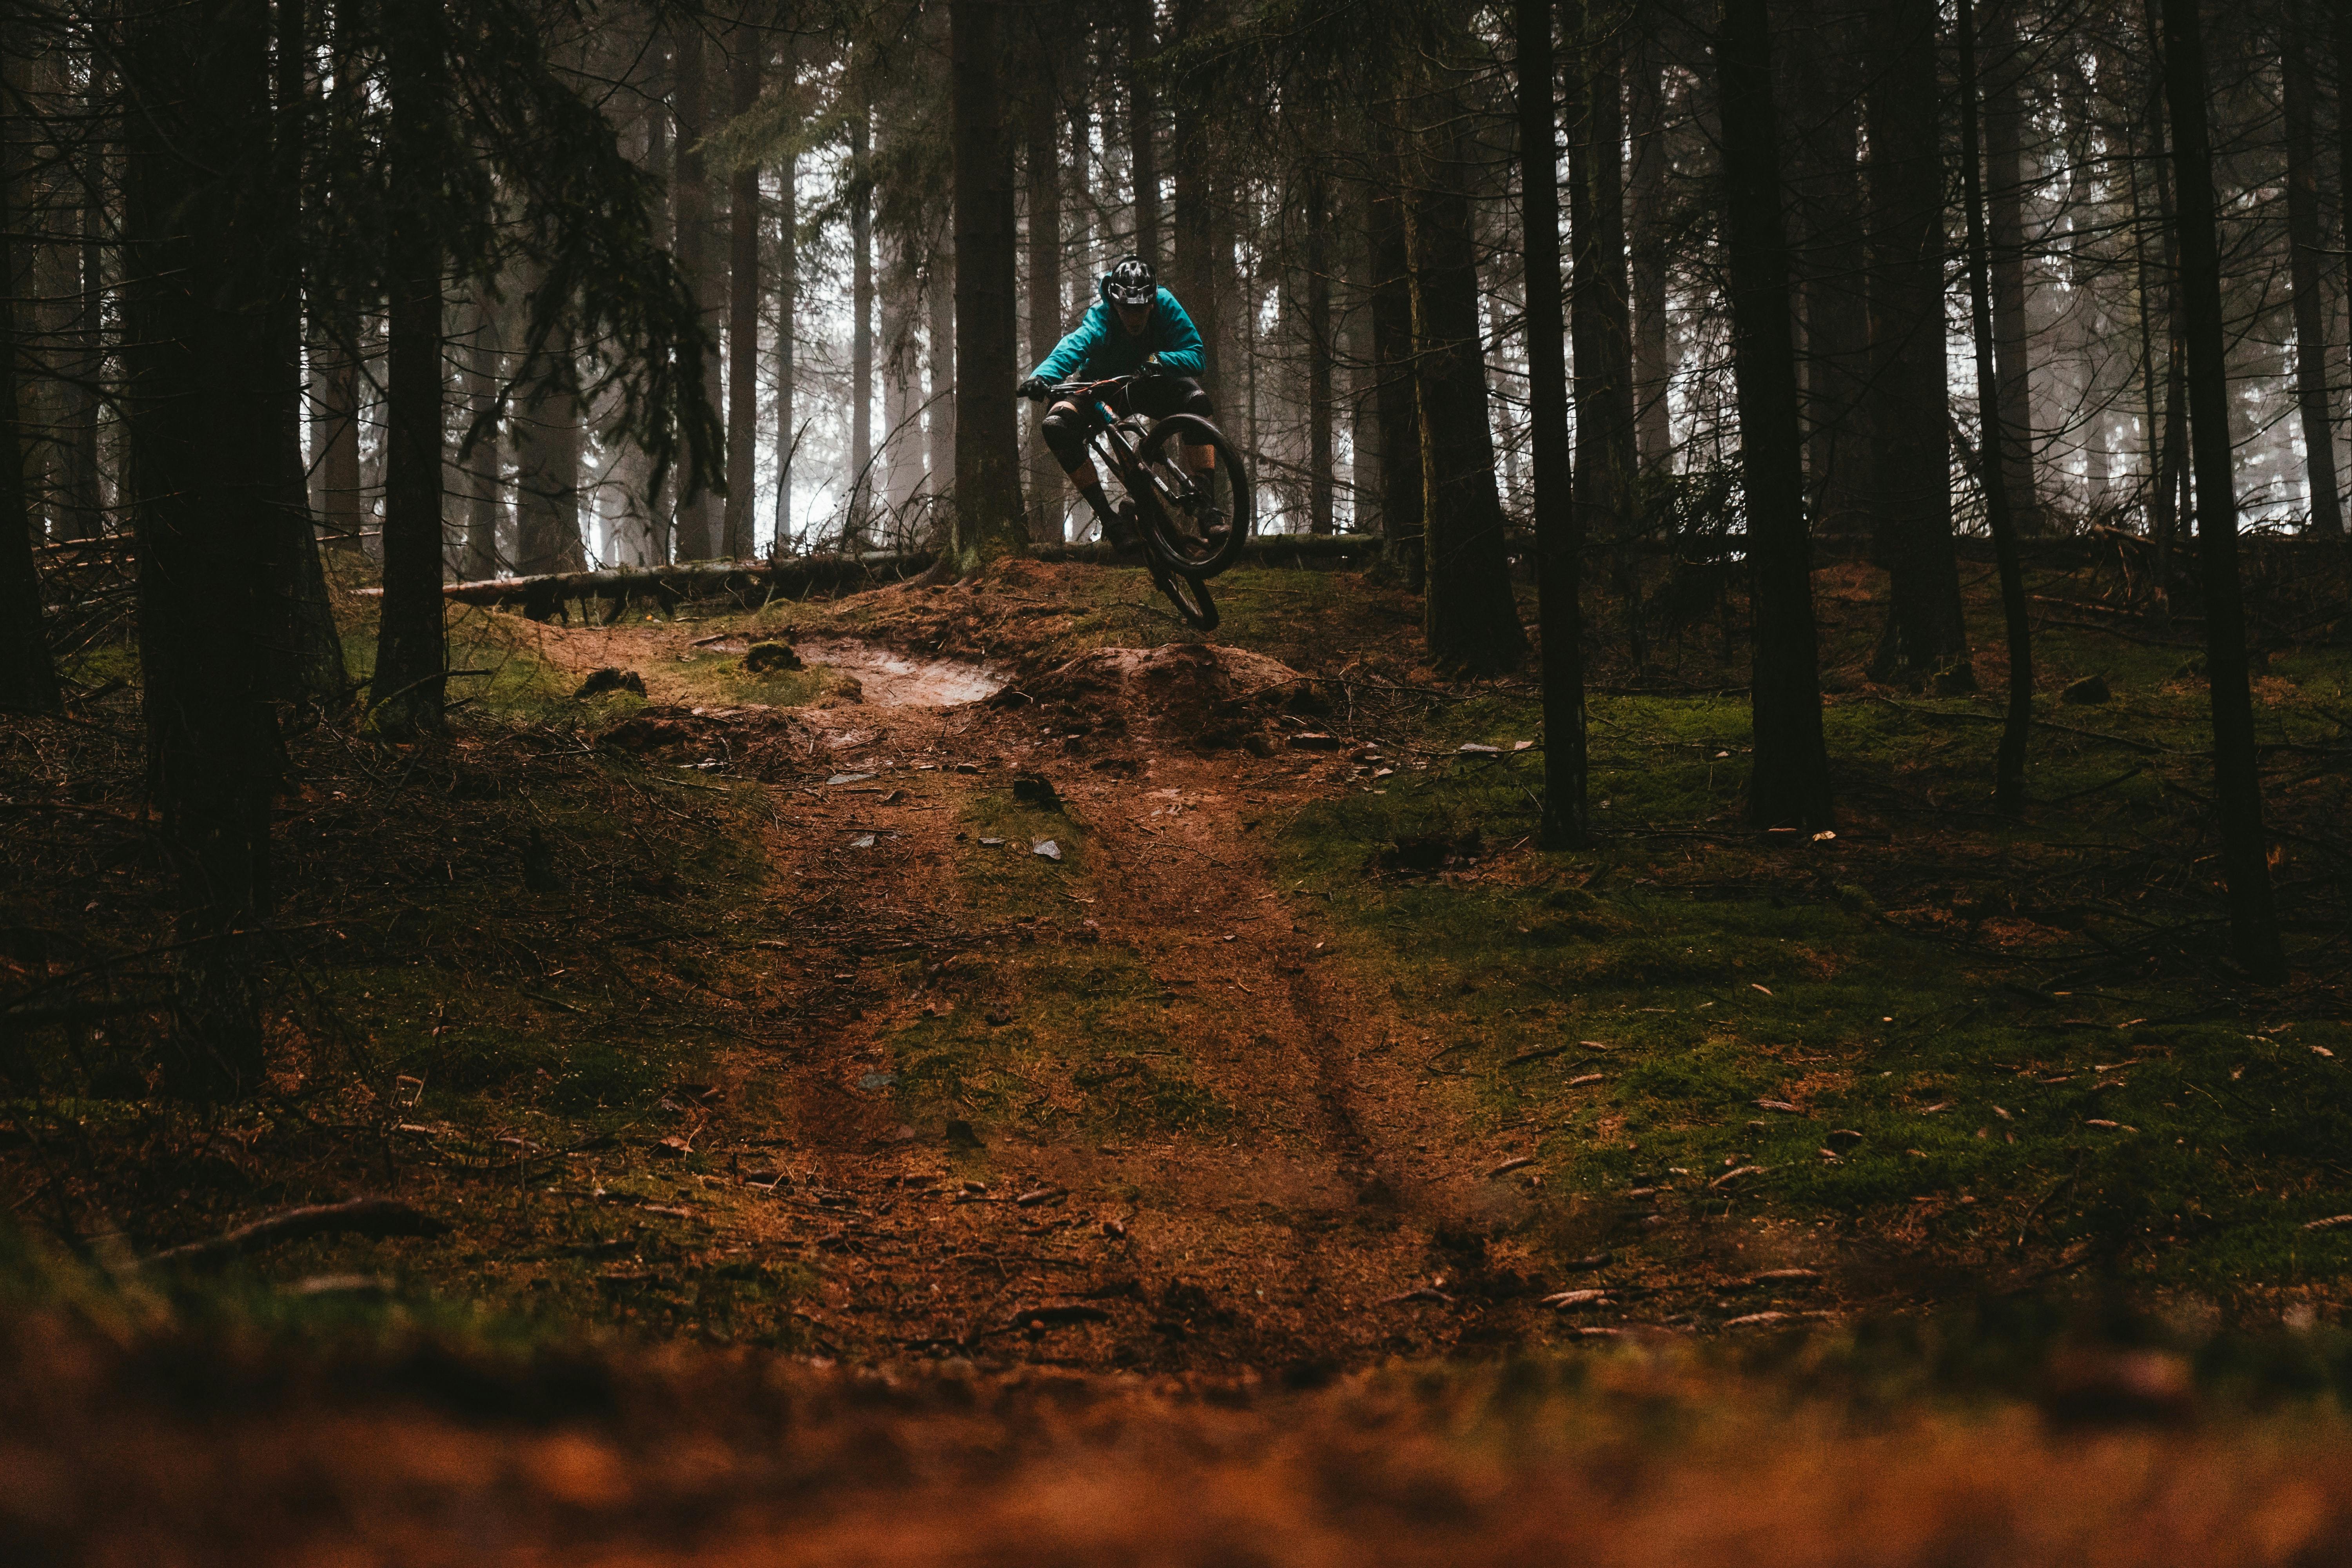 A mountain bike rider flying off a jump on a trail in a dark forest.